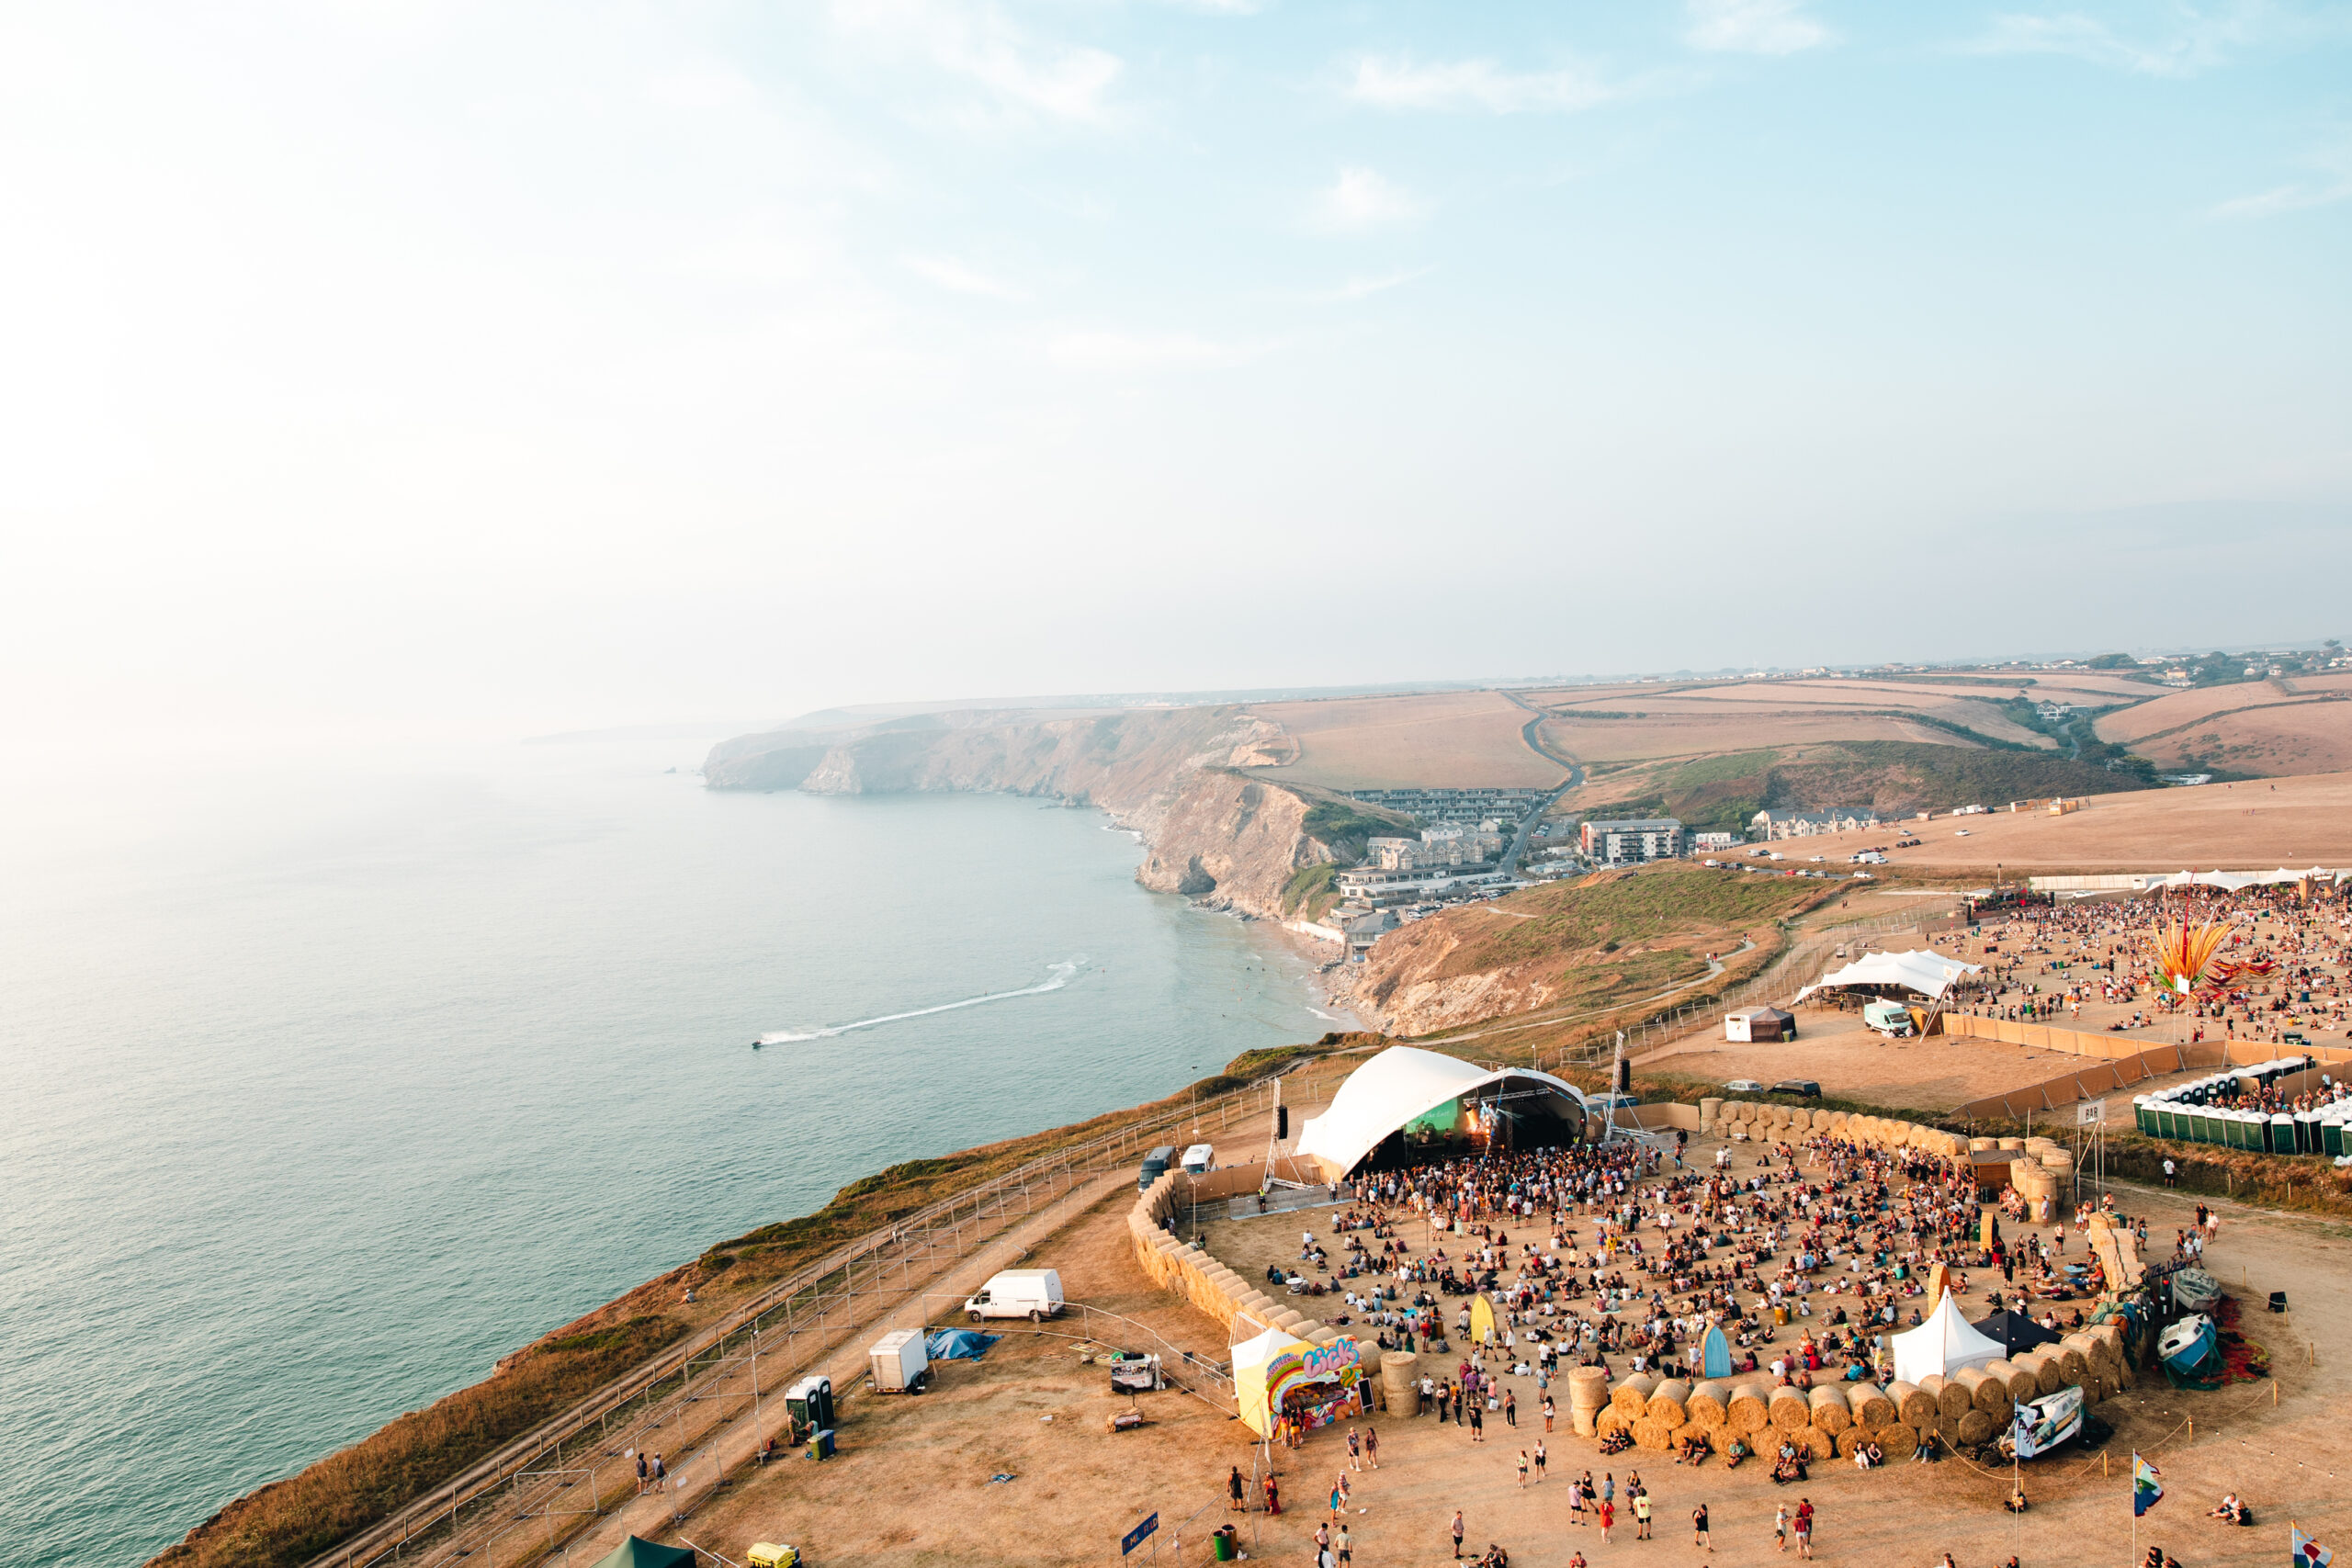 Boardmasters is included in Double Dutch's Festival Content Creator job